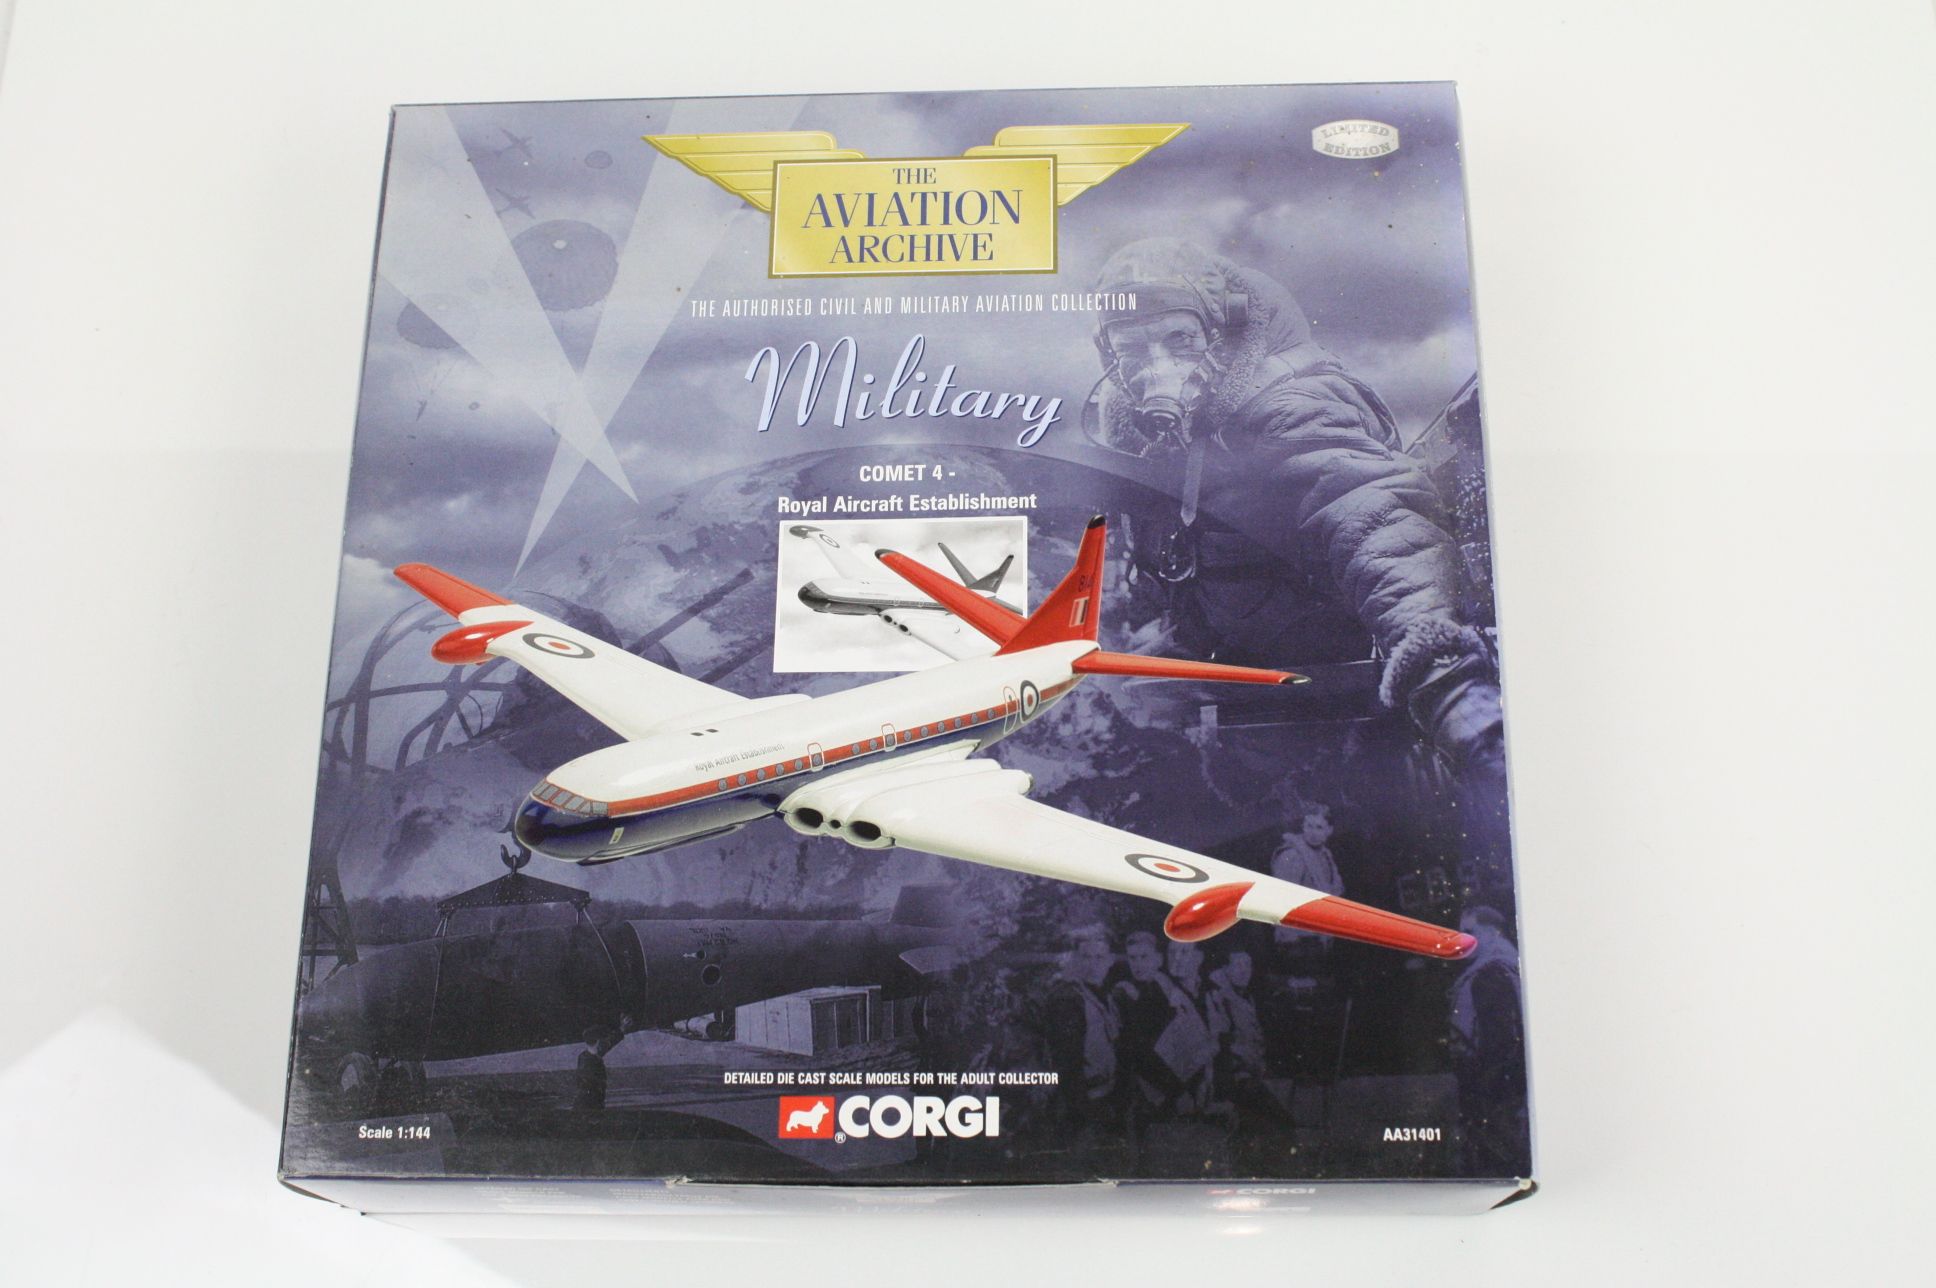 Five boxed ltd edn Corgi The Aviation Archive model planes to include Military x 3 (48805 Short - Image 5 of 12